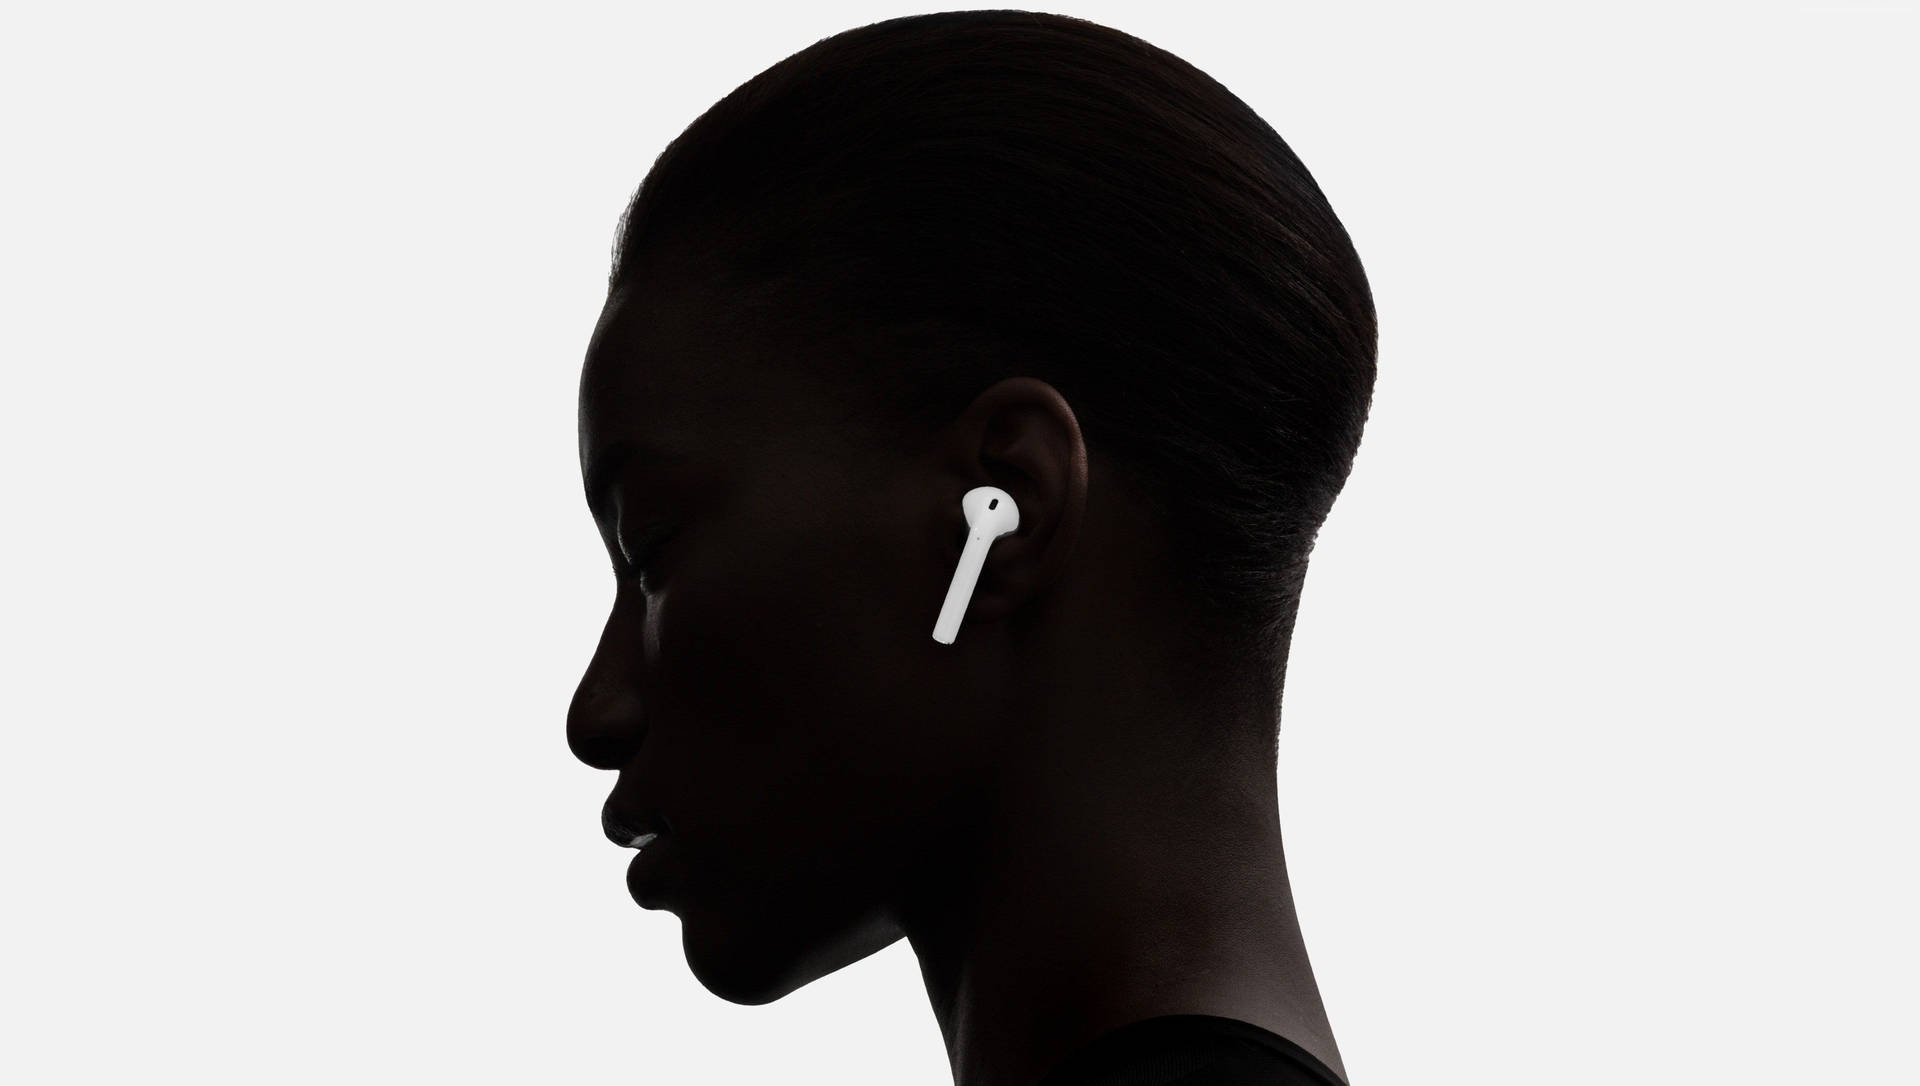 Fraumit Apple Airpods Wallpaper